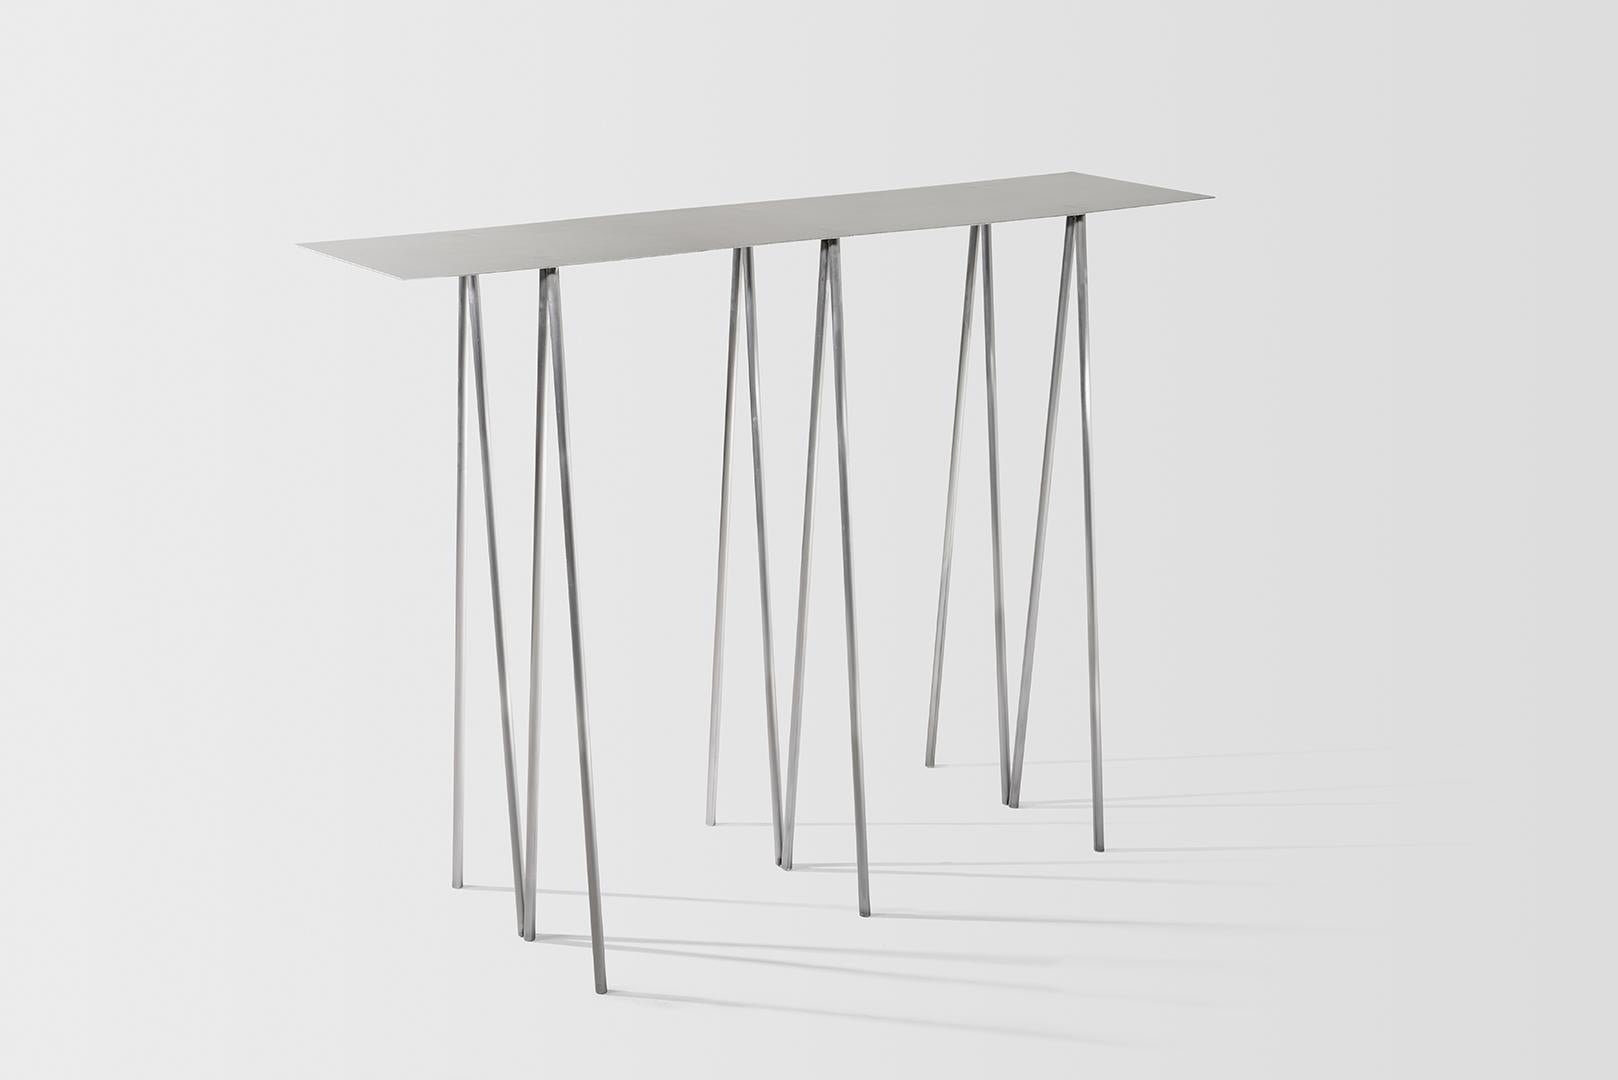 Where metal implies sturdiness, and calls for strong industrial motifs - the I/ the H, the beam / the cross, the Paper Table is a play on our own sense of balance. 

It questions the thinness of both surface and structure, in order to reach their